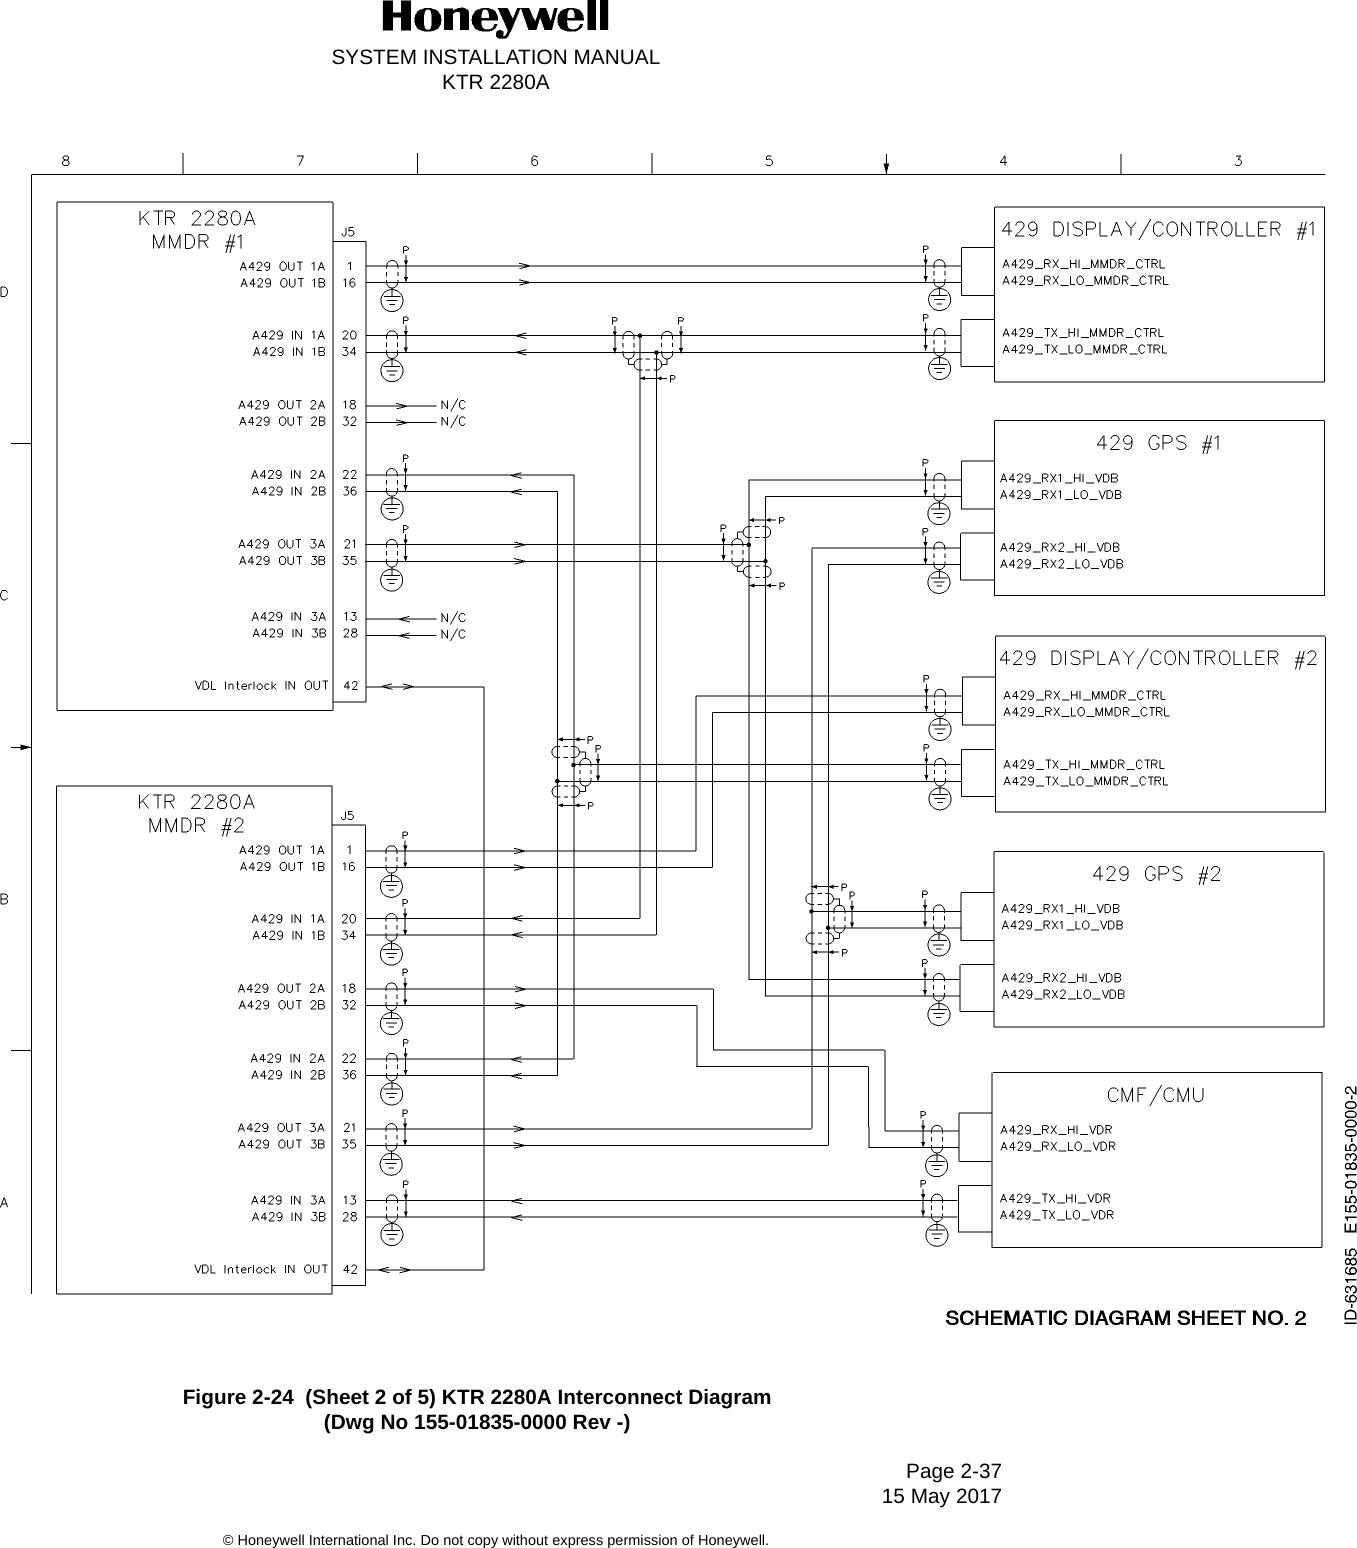 SYSTEM INSTALLATION MANUALKTR 2280APage 2-37 15 May 2017© Honeywell International Inc. Do not copy without express permission of Honeywell.Figure 2-24  (Sheet 2 of 5) KTR 2280A Interconnect Diagram(Dwg No 155-01835-0000 Rev -)